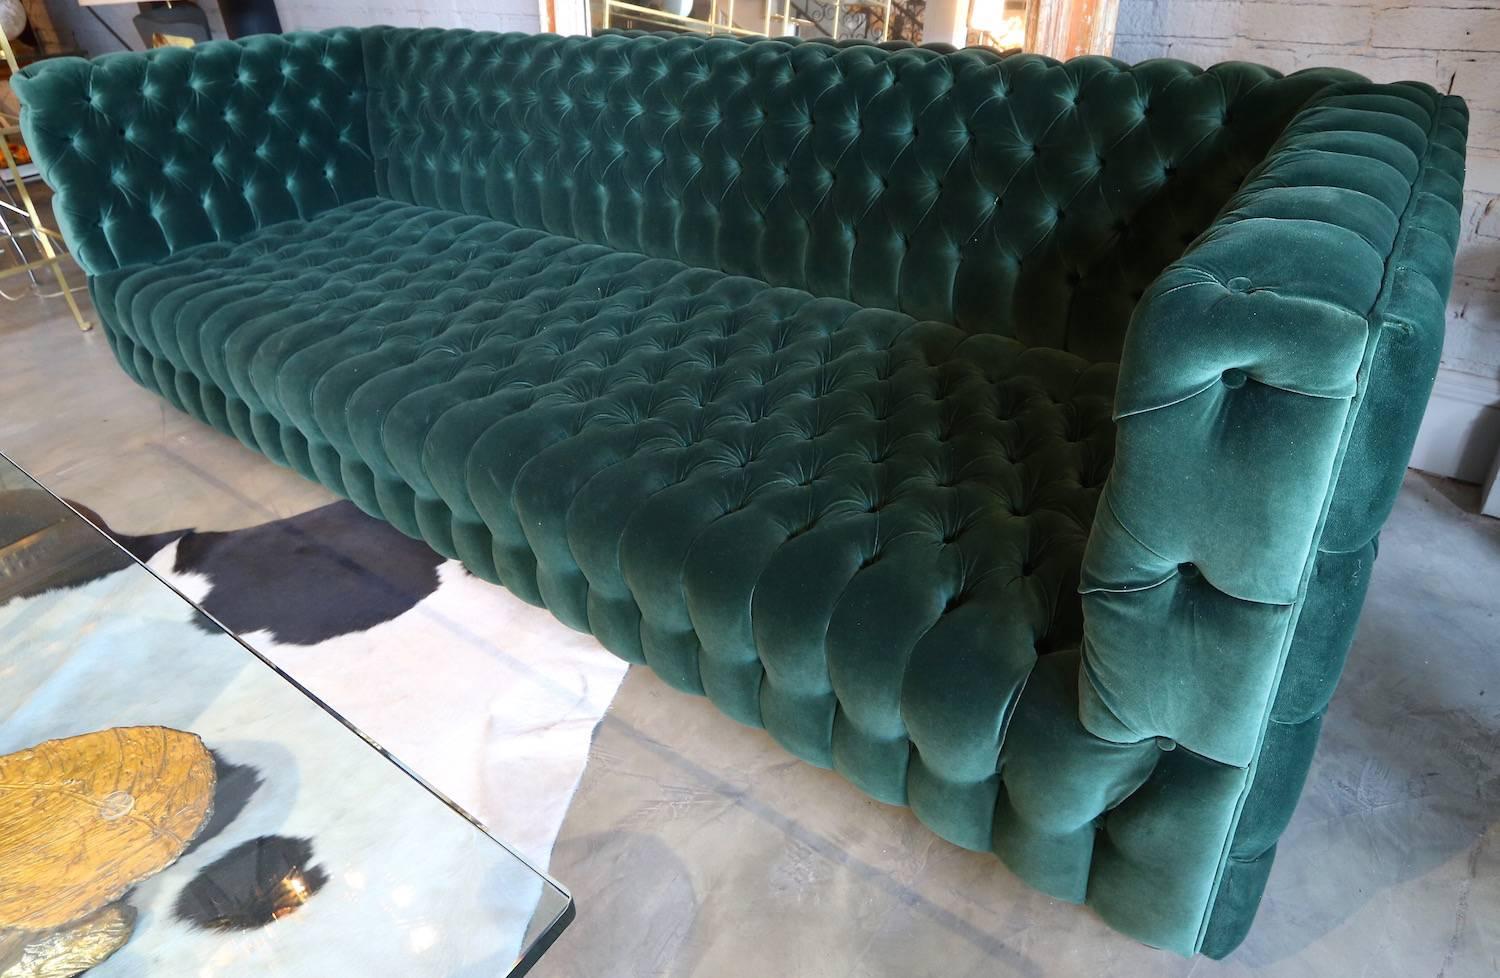 Spectacular custom Capitone Carmen tufted sofa upholstered in green Belgium velvet. Every side of the sofa is tufted, even the back. Made in Los Angeles by Adesso Imports. Can be made in different sizes and colors.